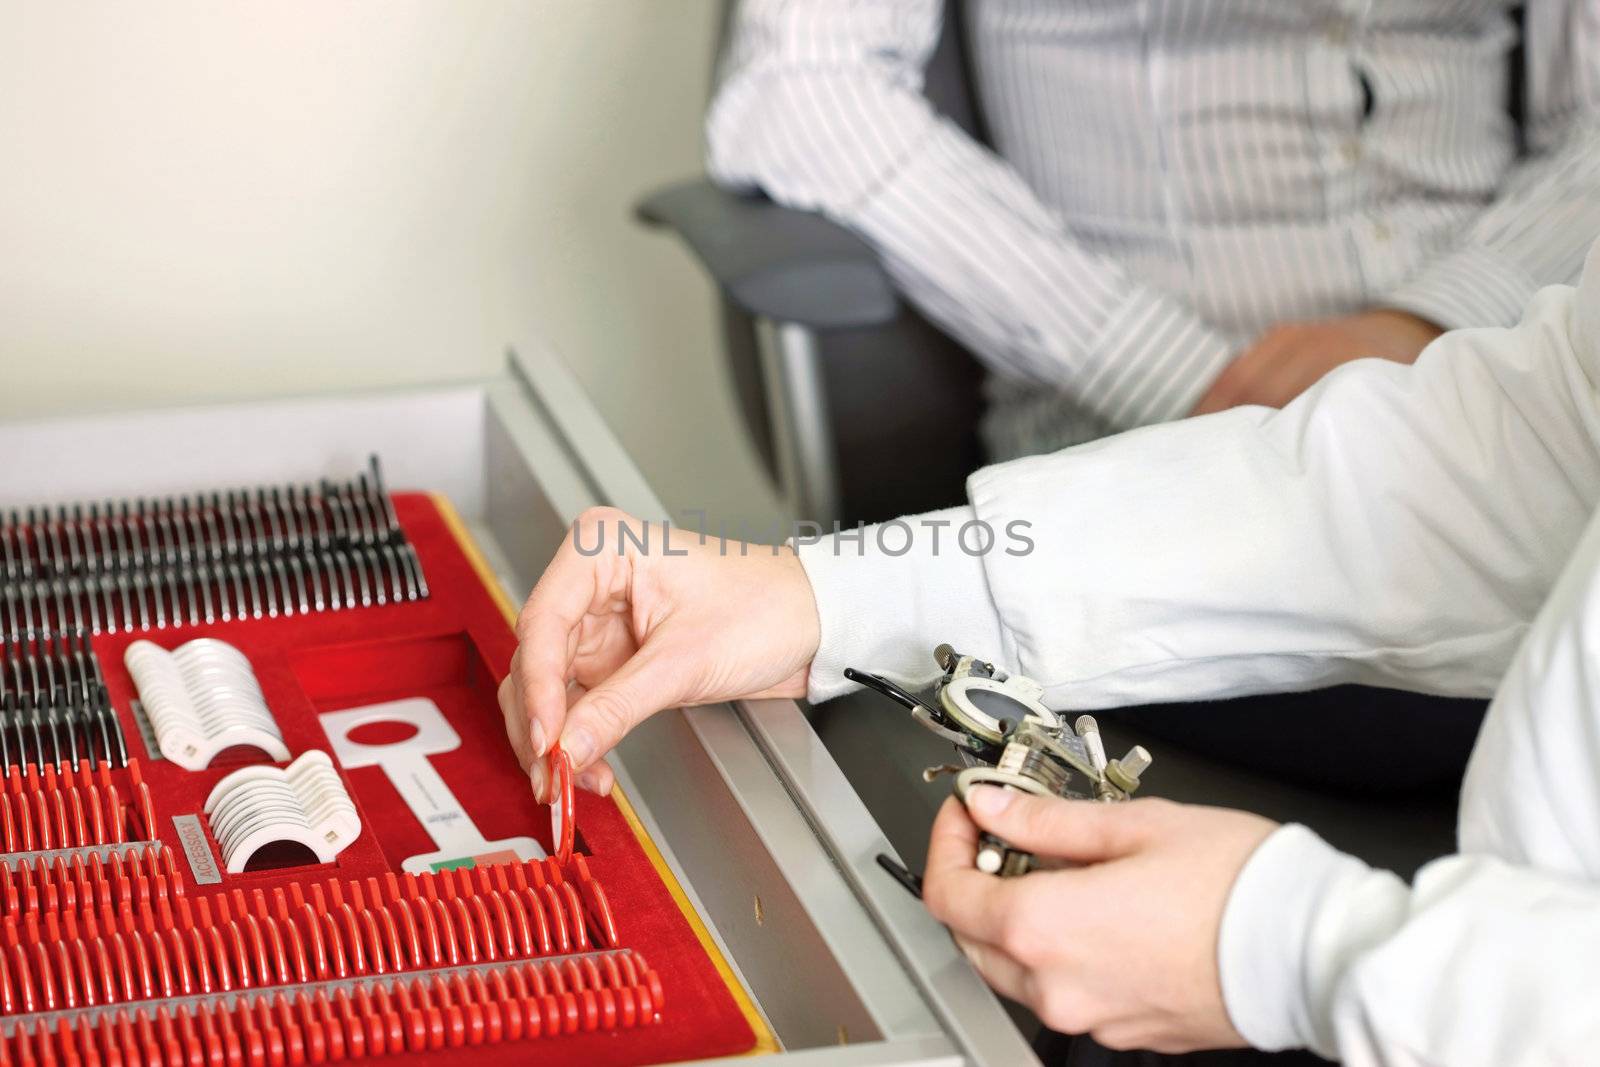 Optometrist or eye doctor about to put lens in a trial frames during a vision checkup